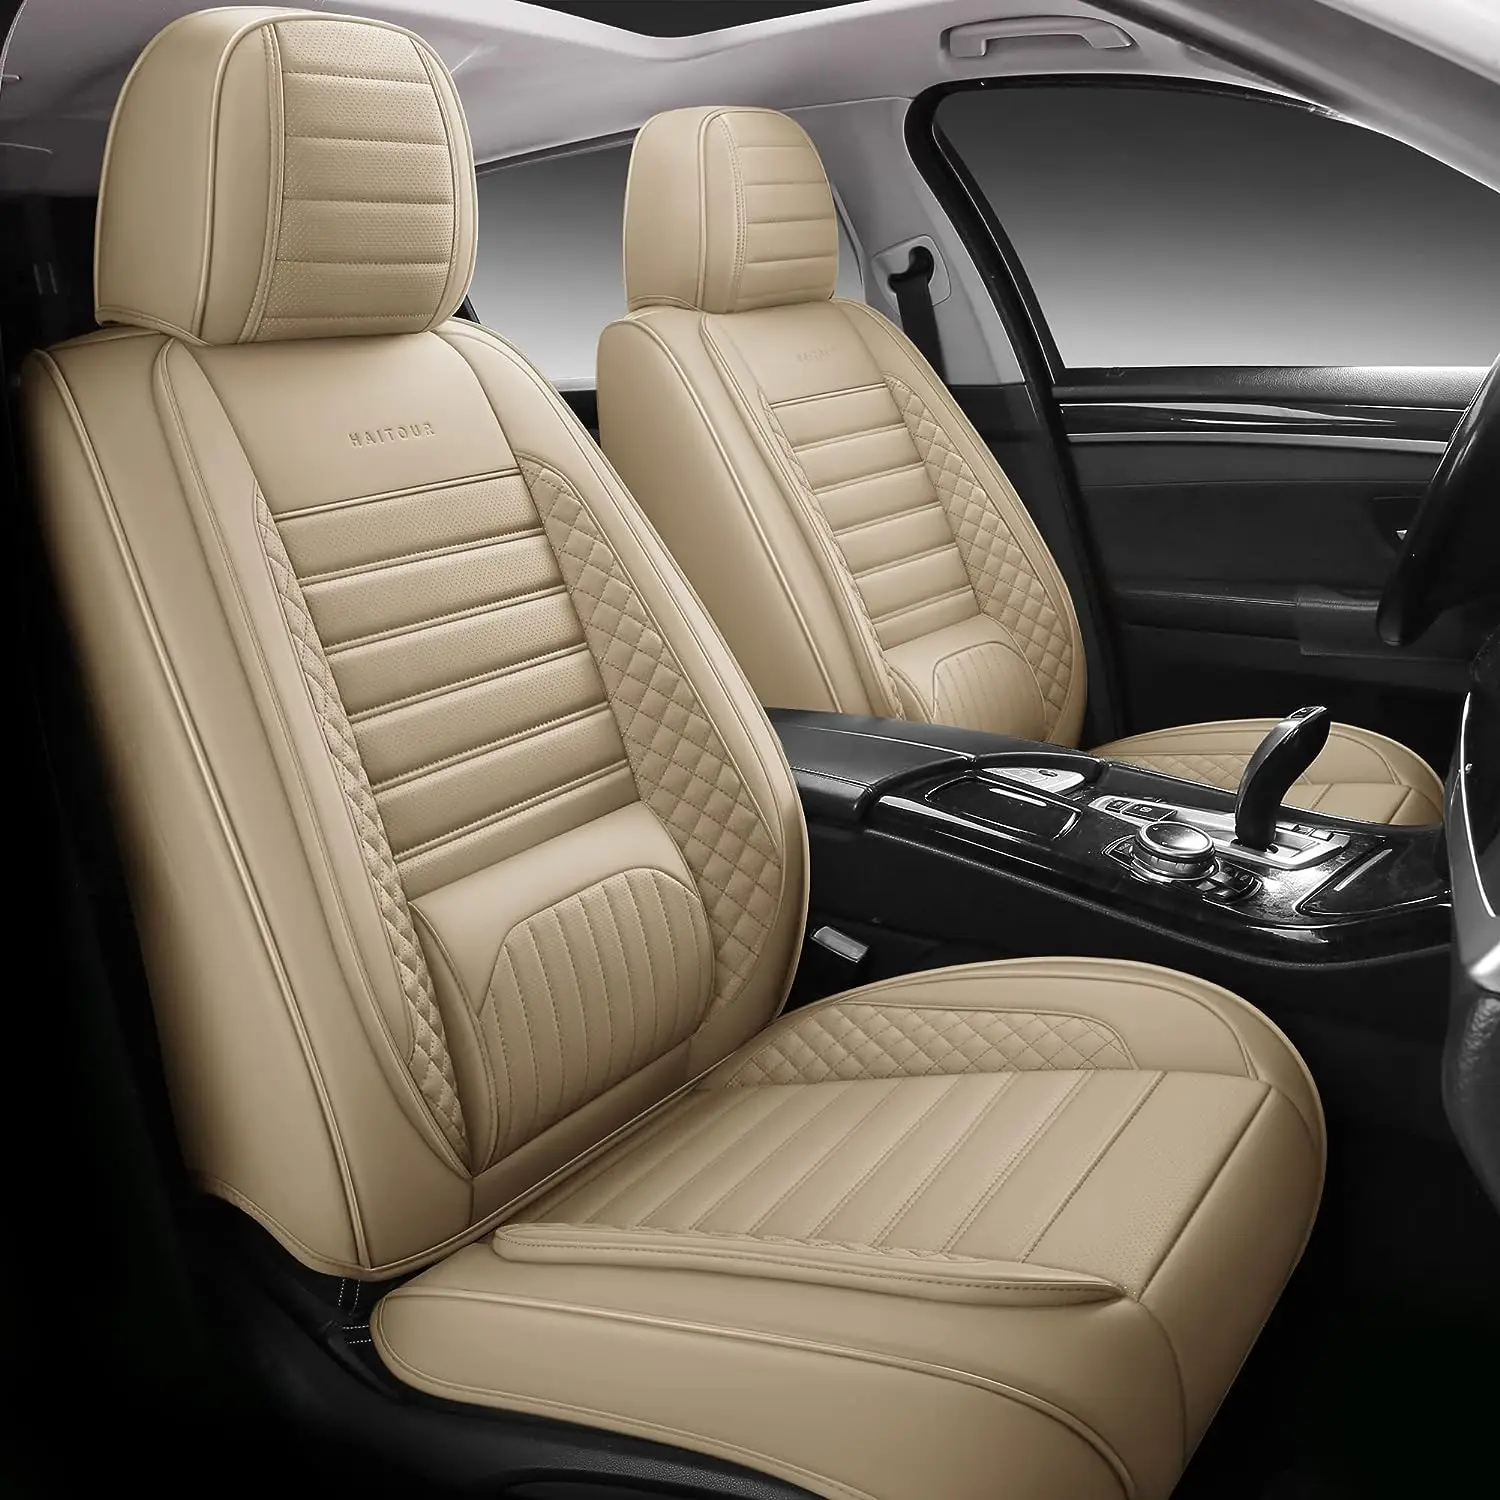 

Full Coverage Leather Car Seat Covers Full Set Universal Fit for Most Cars Sedans Trucks SUVs Waterproof Leatherette